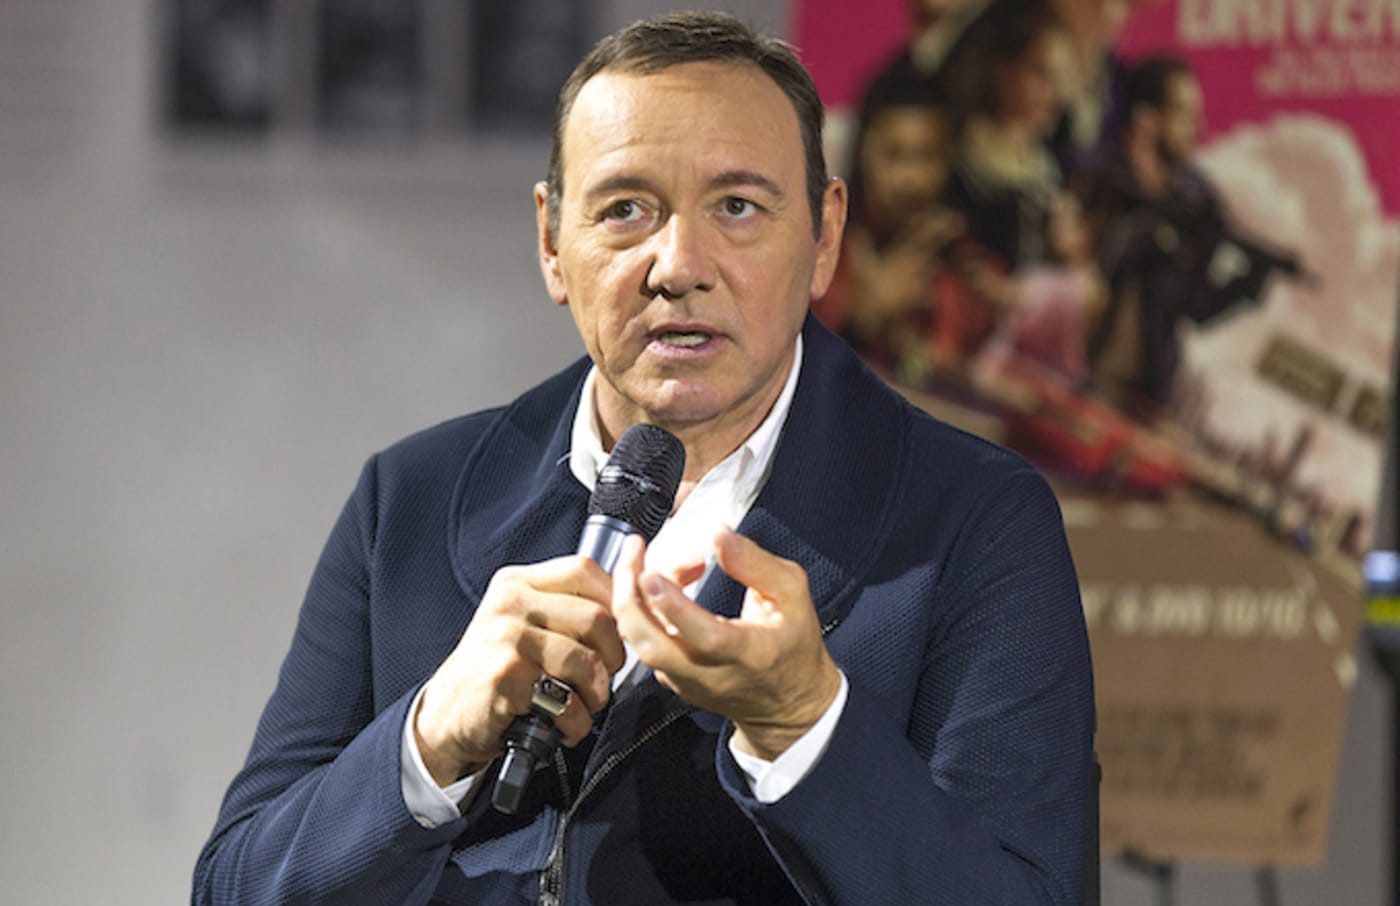 Actor/producer Kevin Spacey.